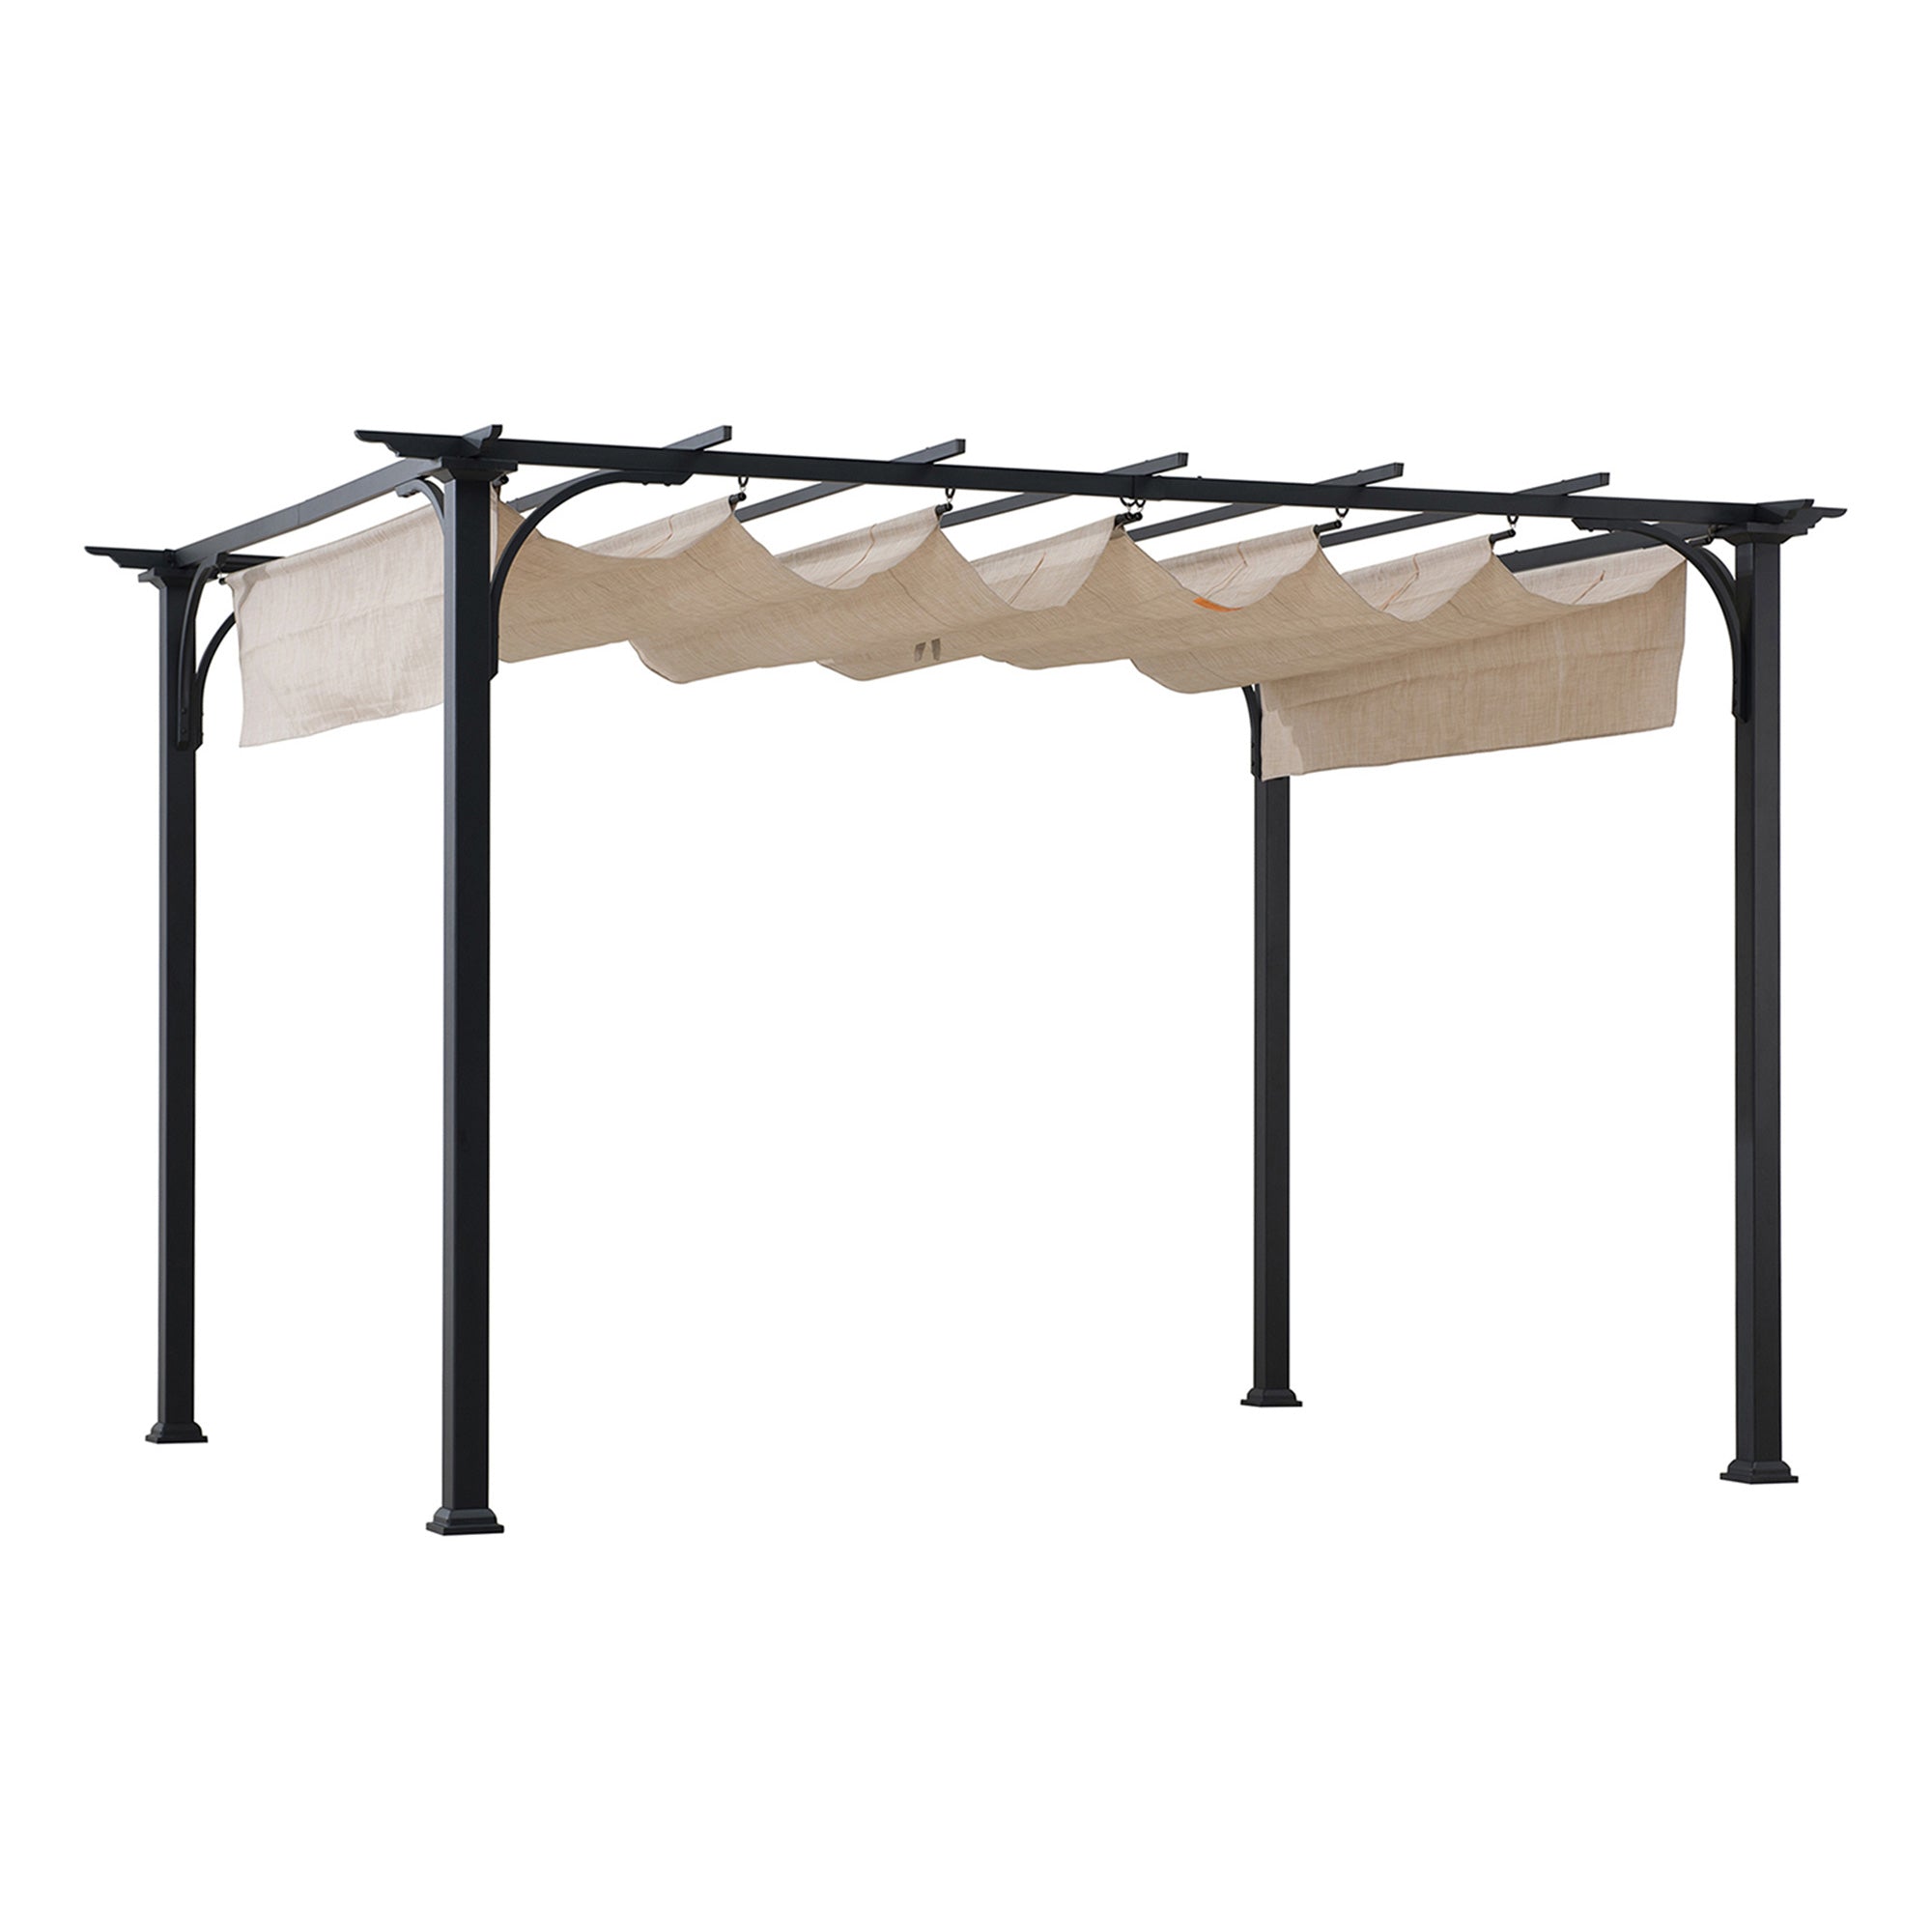 Sunjoy Beige Replacement Canopy For RetracTable Shade Pergola (9.5x11.5 Ft) A106005600/A106005610 Sold At SunNest.